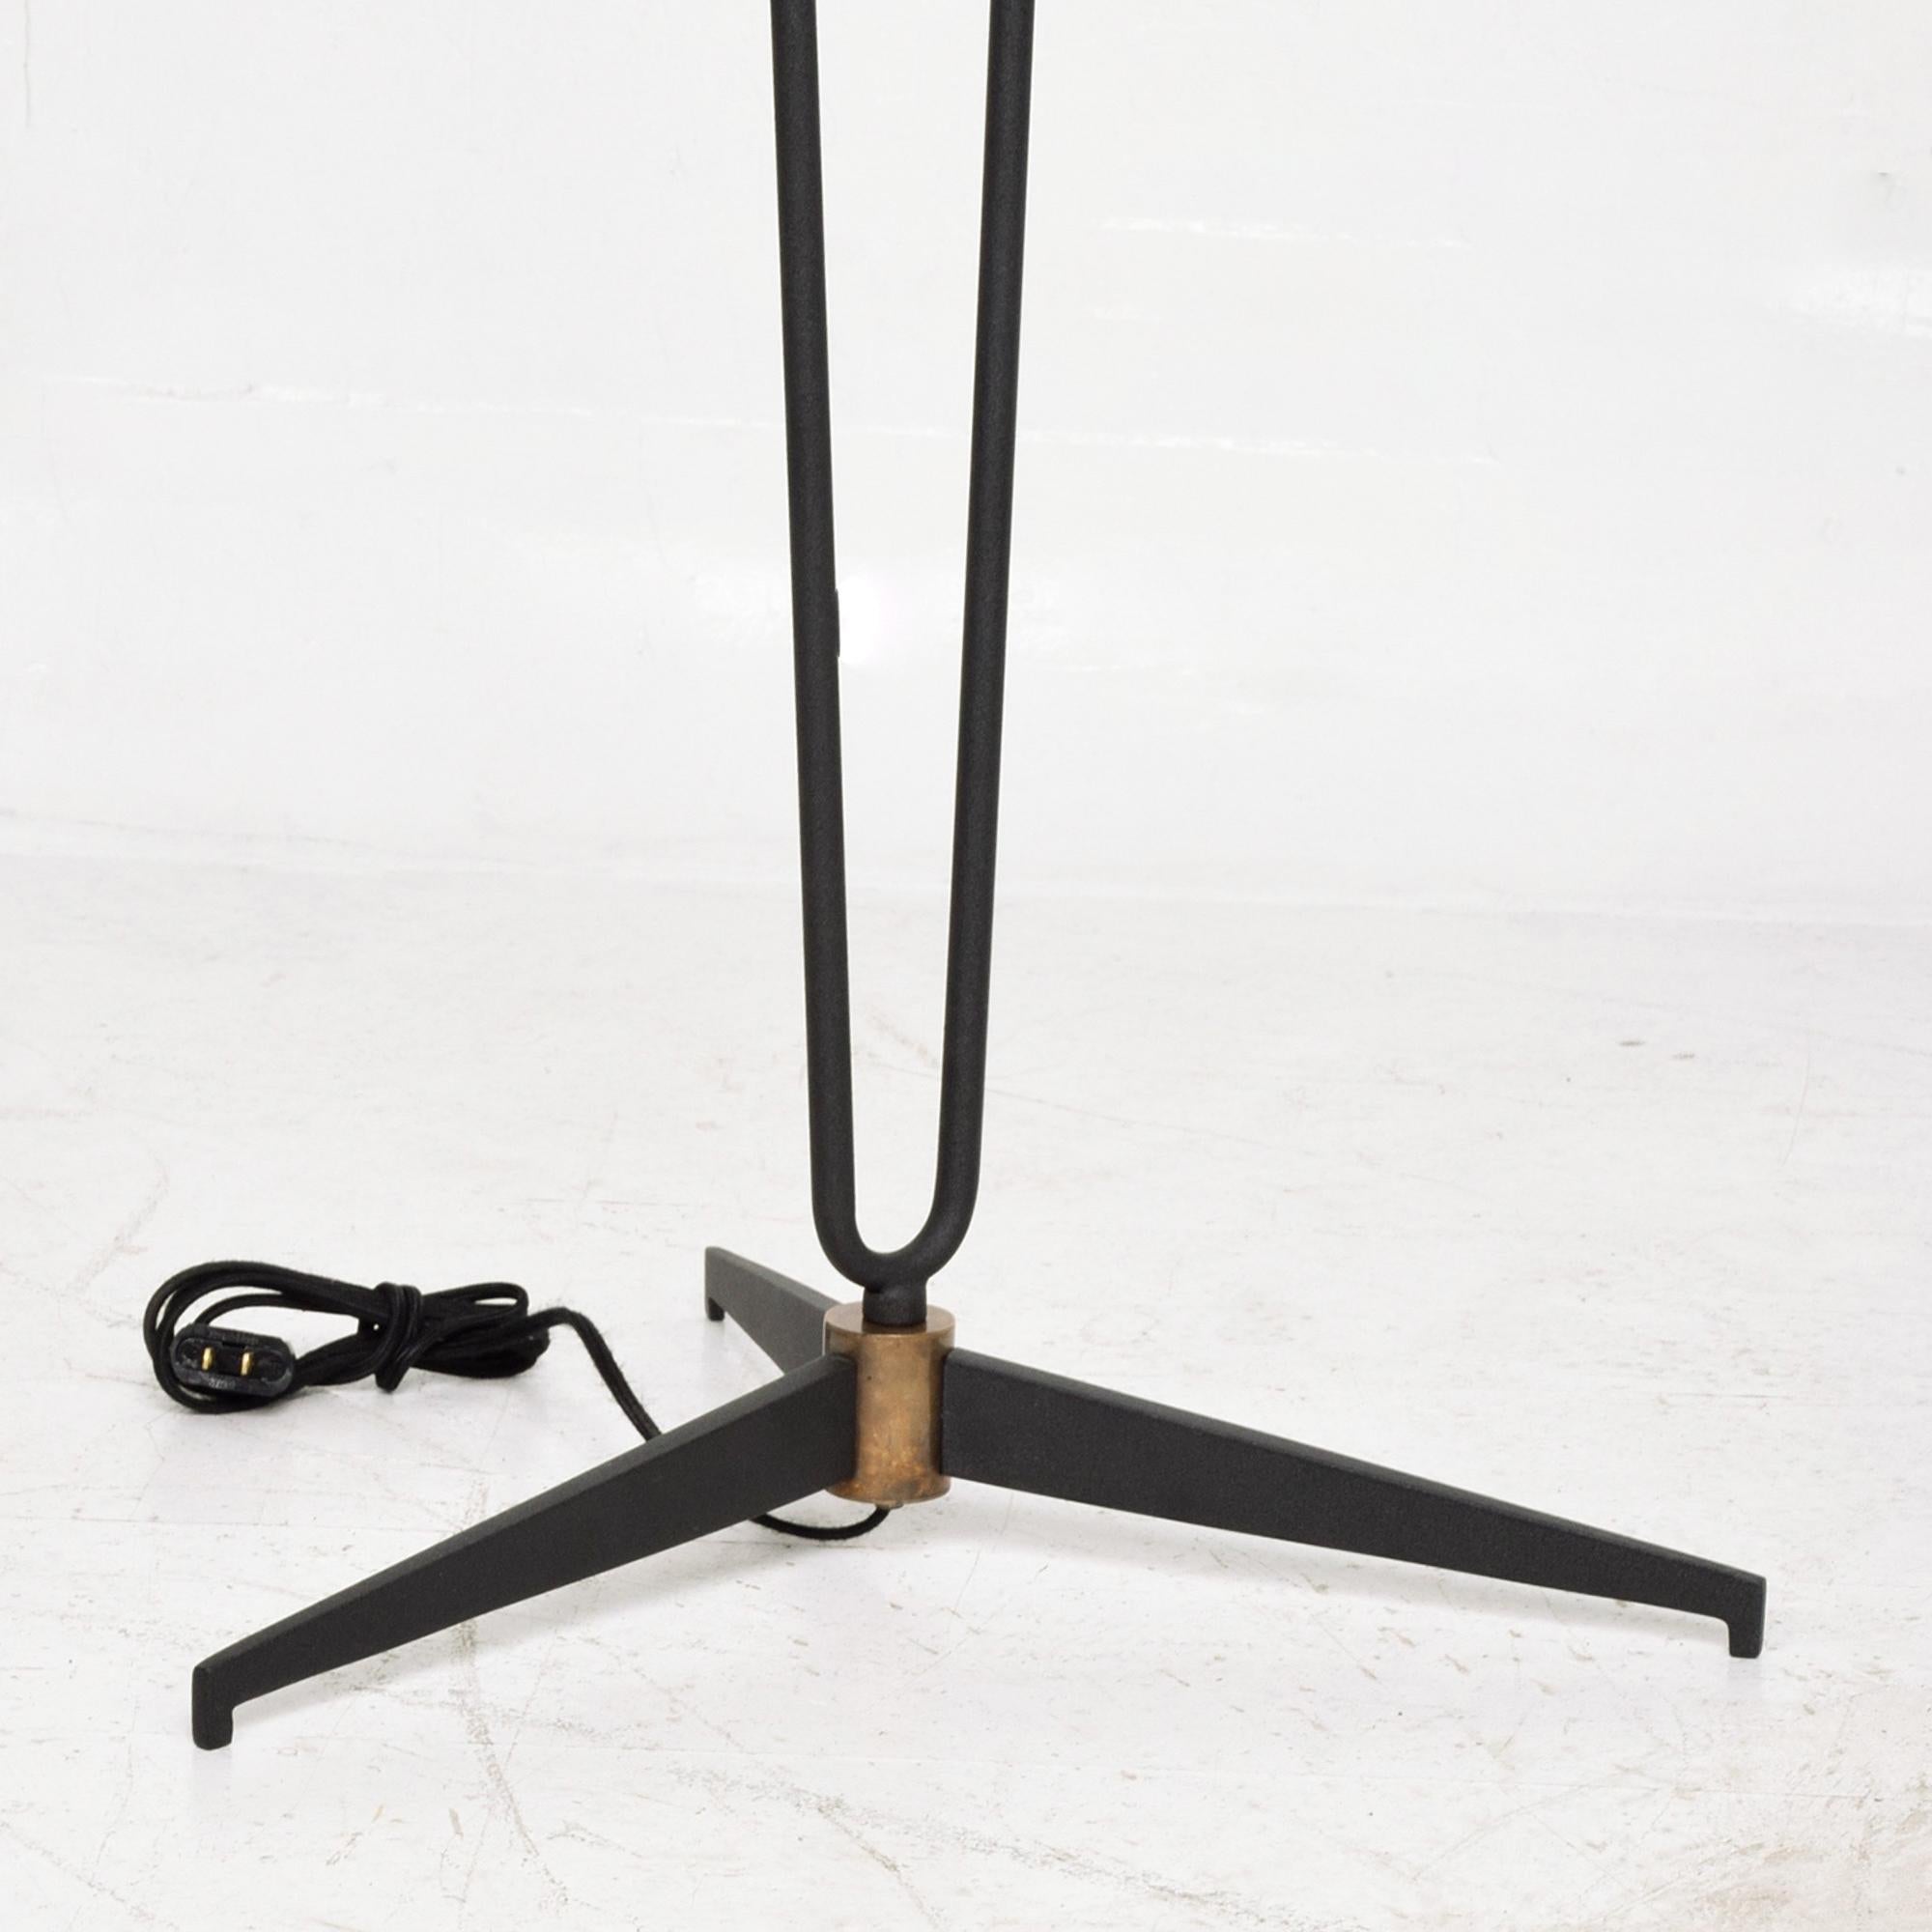 Mid-20th Century French Floor Lamp Style Arlus France 1950s Modern Sophisticate Steel and Brass